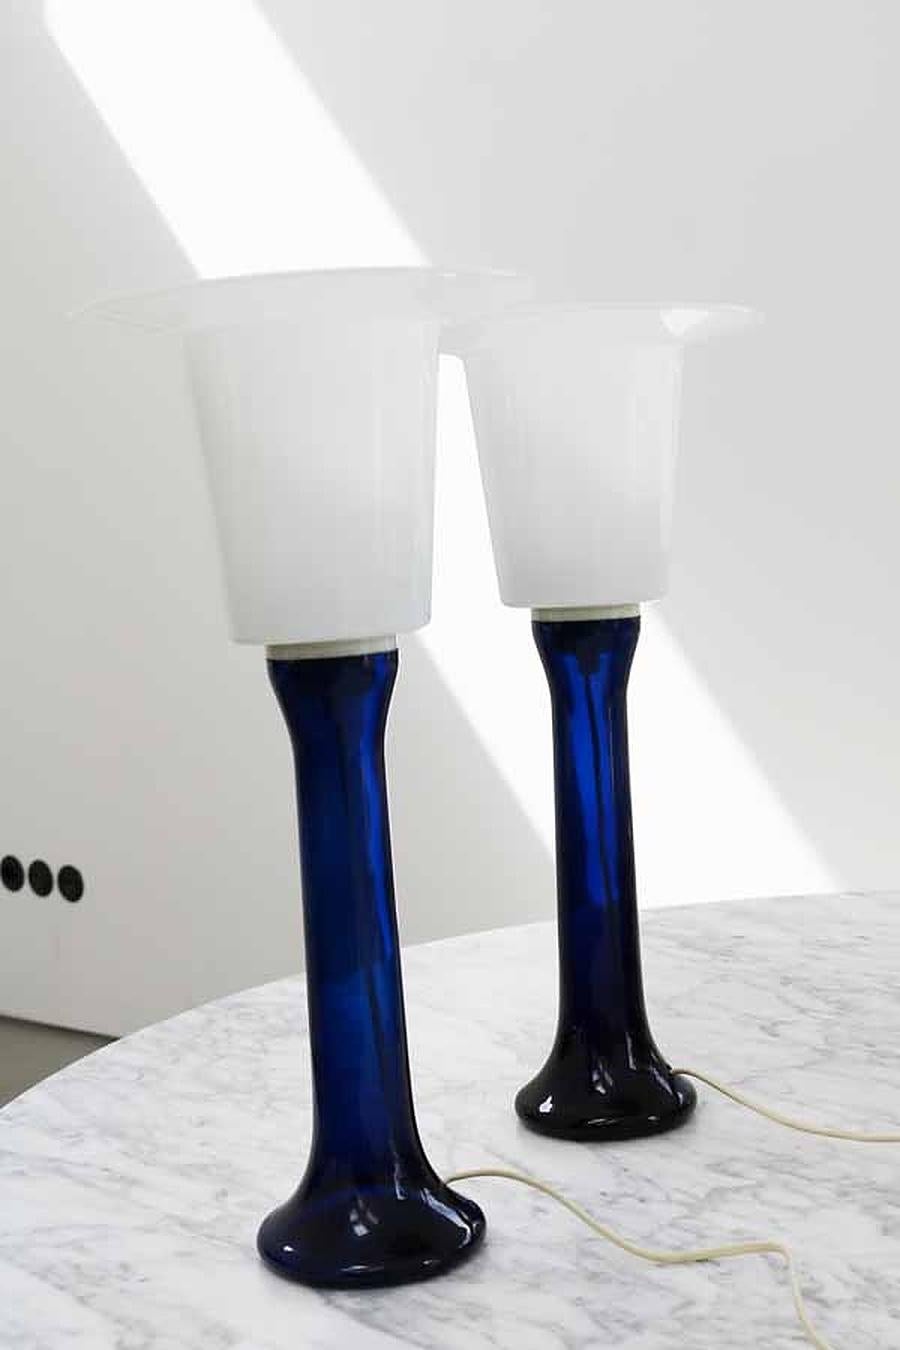 Mid-20th Century Pair of 2 Rare Glass Table Lamps by Uno & Östen Kristiansson, Sweden For Sale